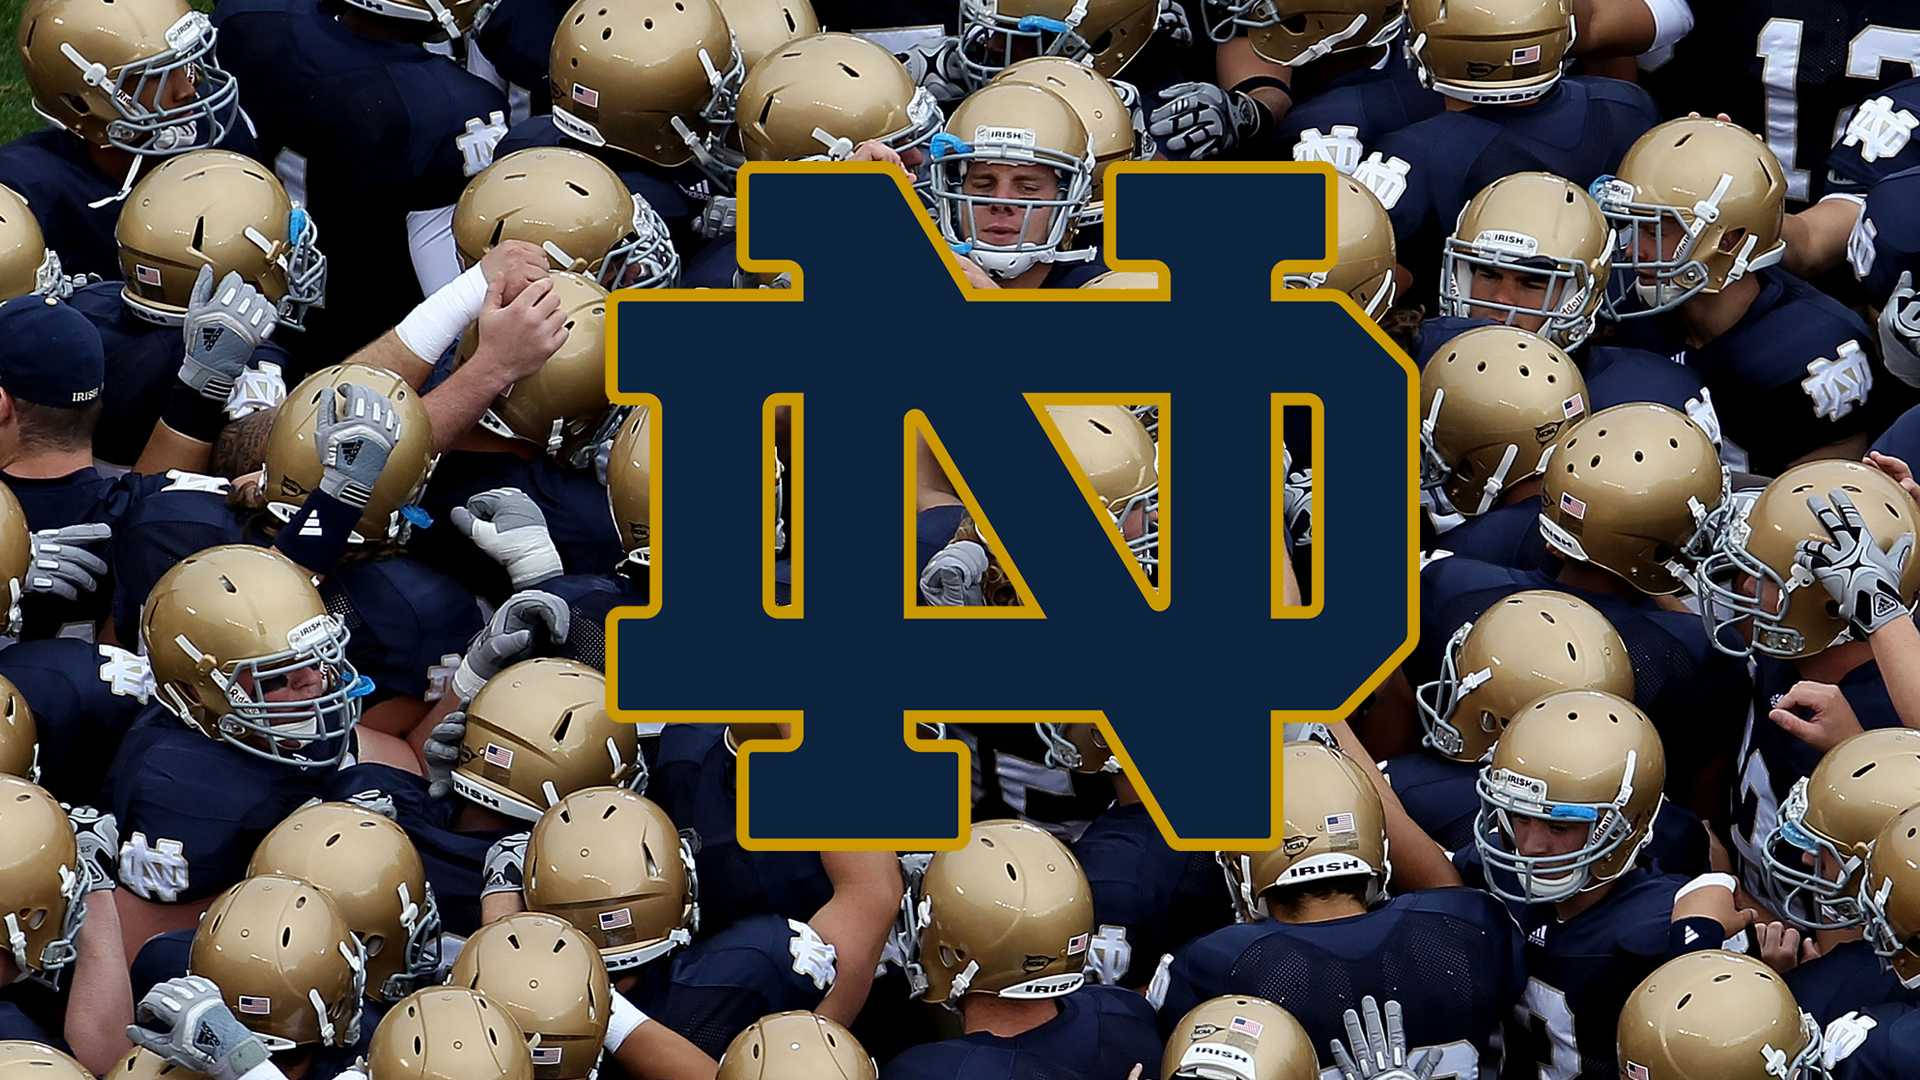 Wallpaper Wednesday #uNDefeated... - Notre Dame Football | Facebook